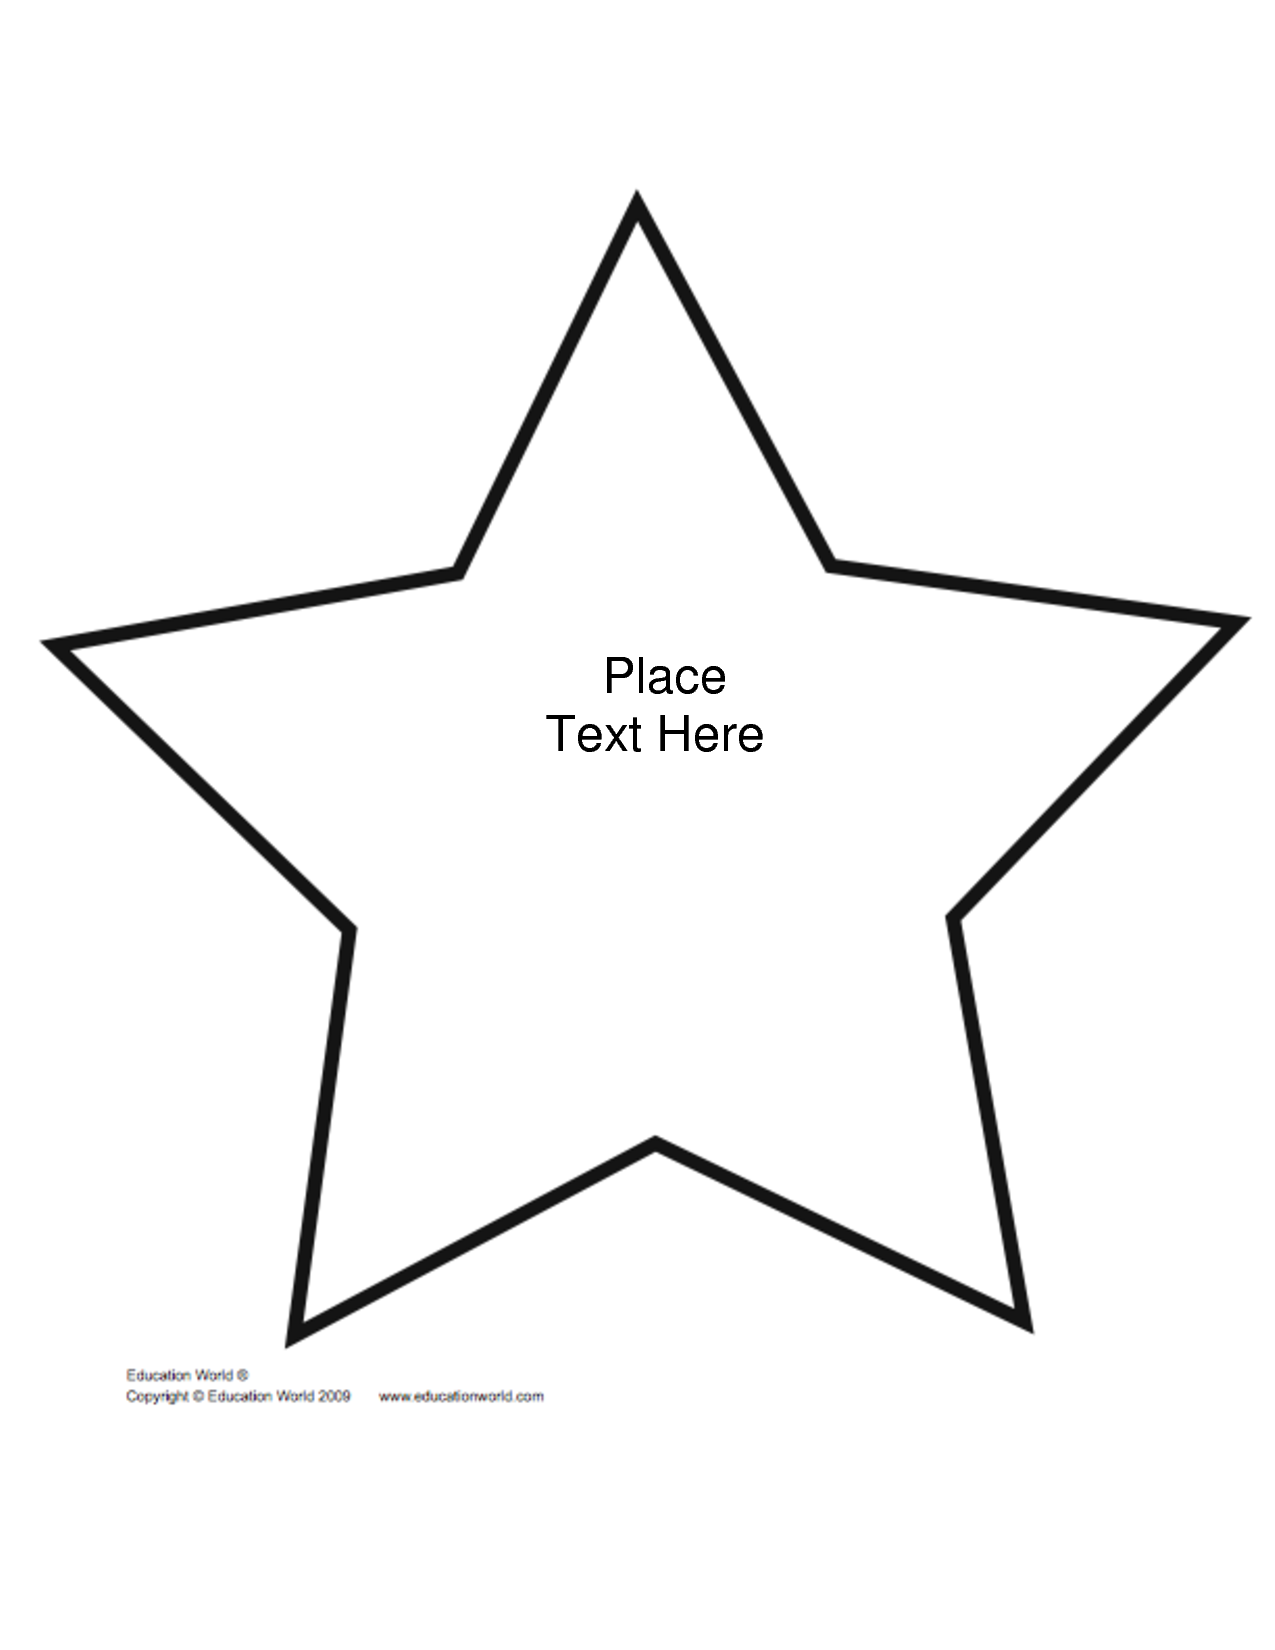 Best Photos of Star Templates Printable Free - Star Outline ...